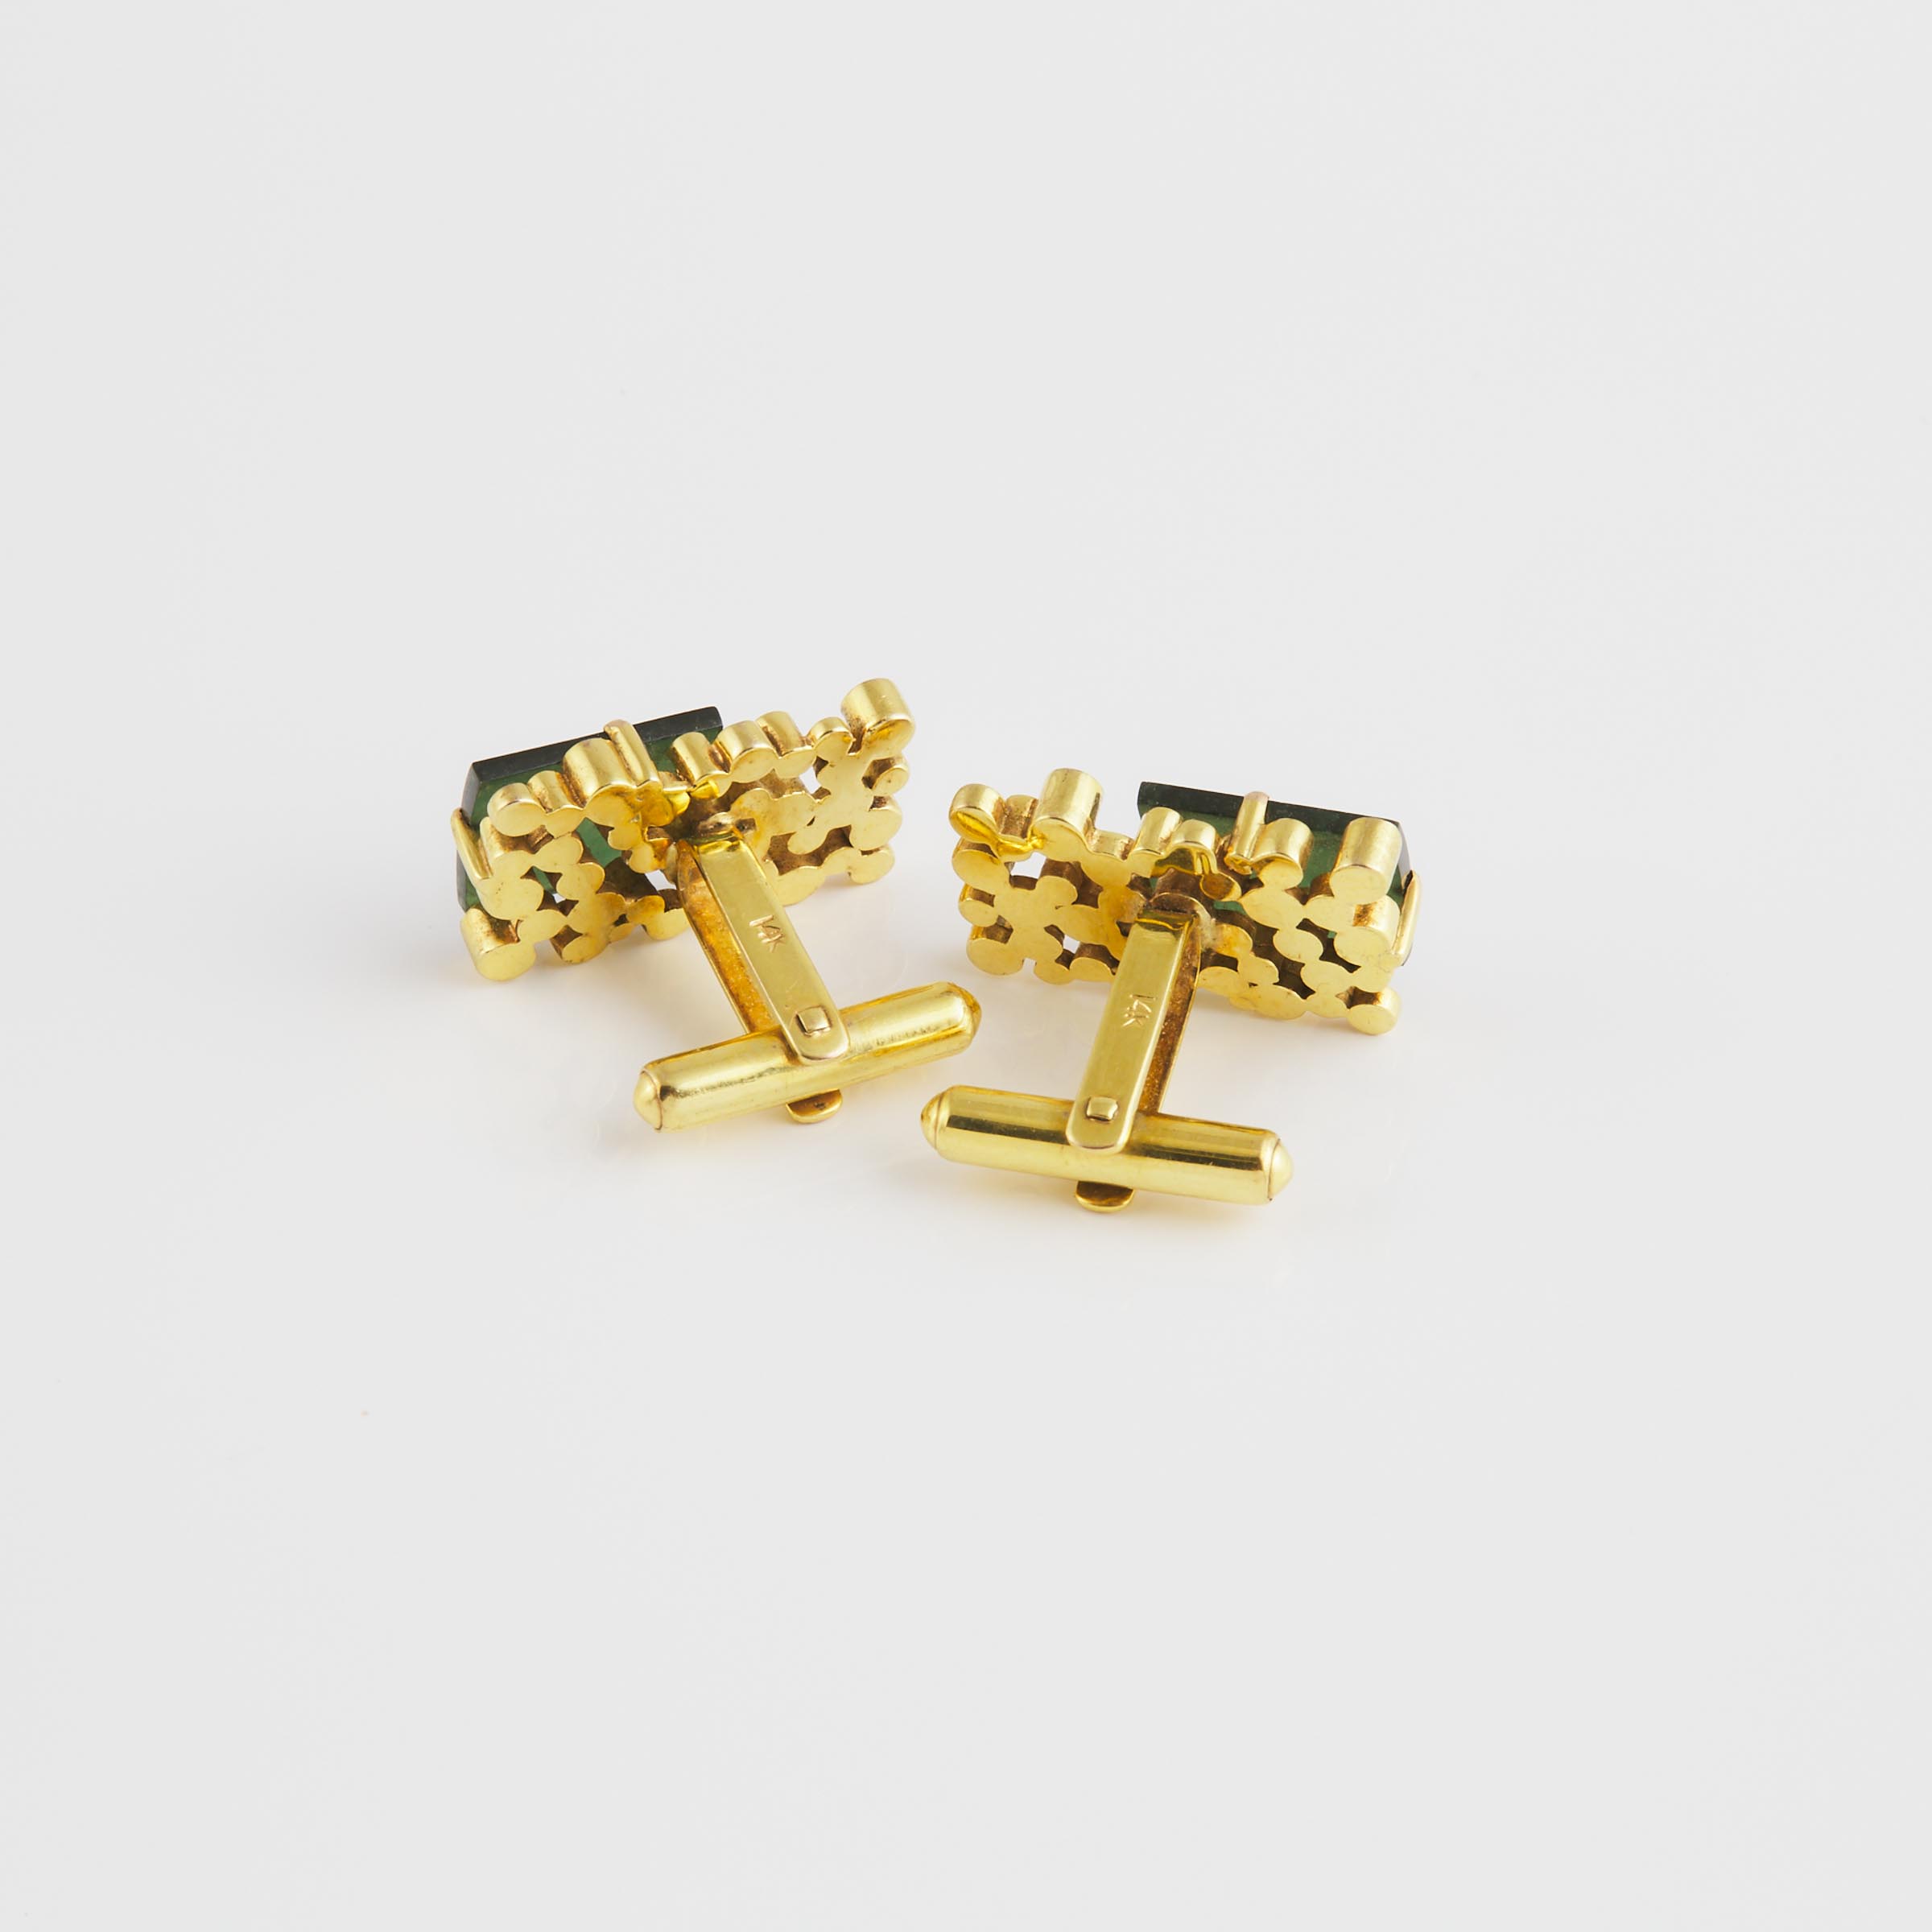 Pair Of 14k Yellow Gold Abstract Cufflinks